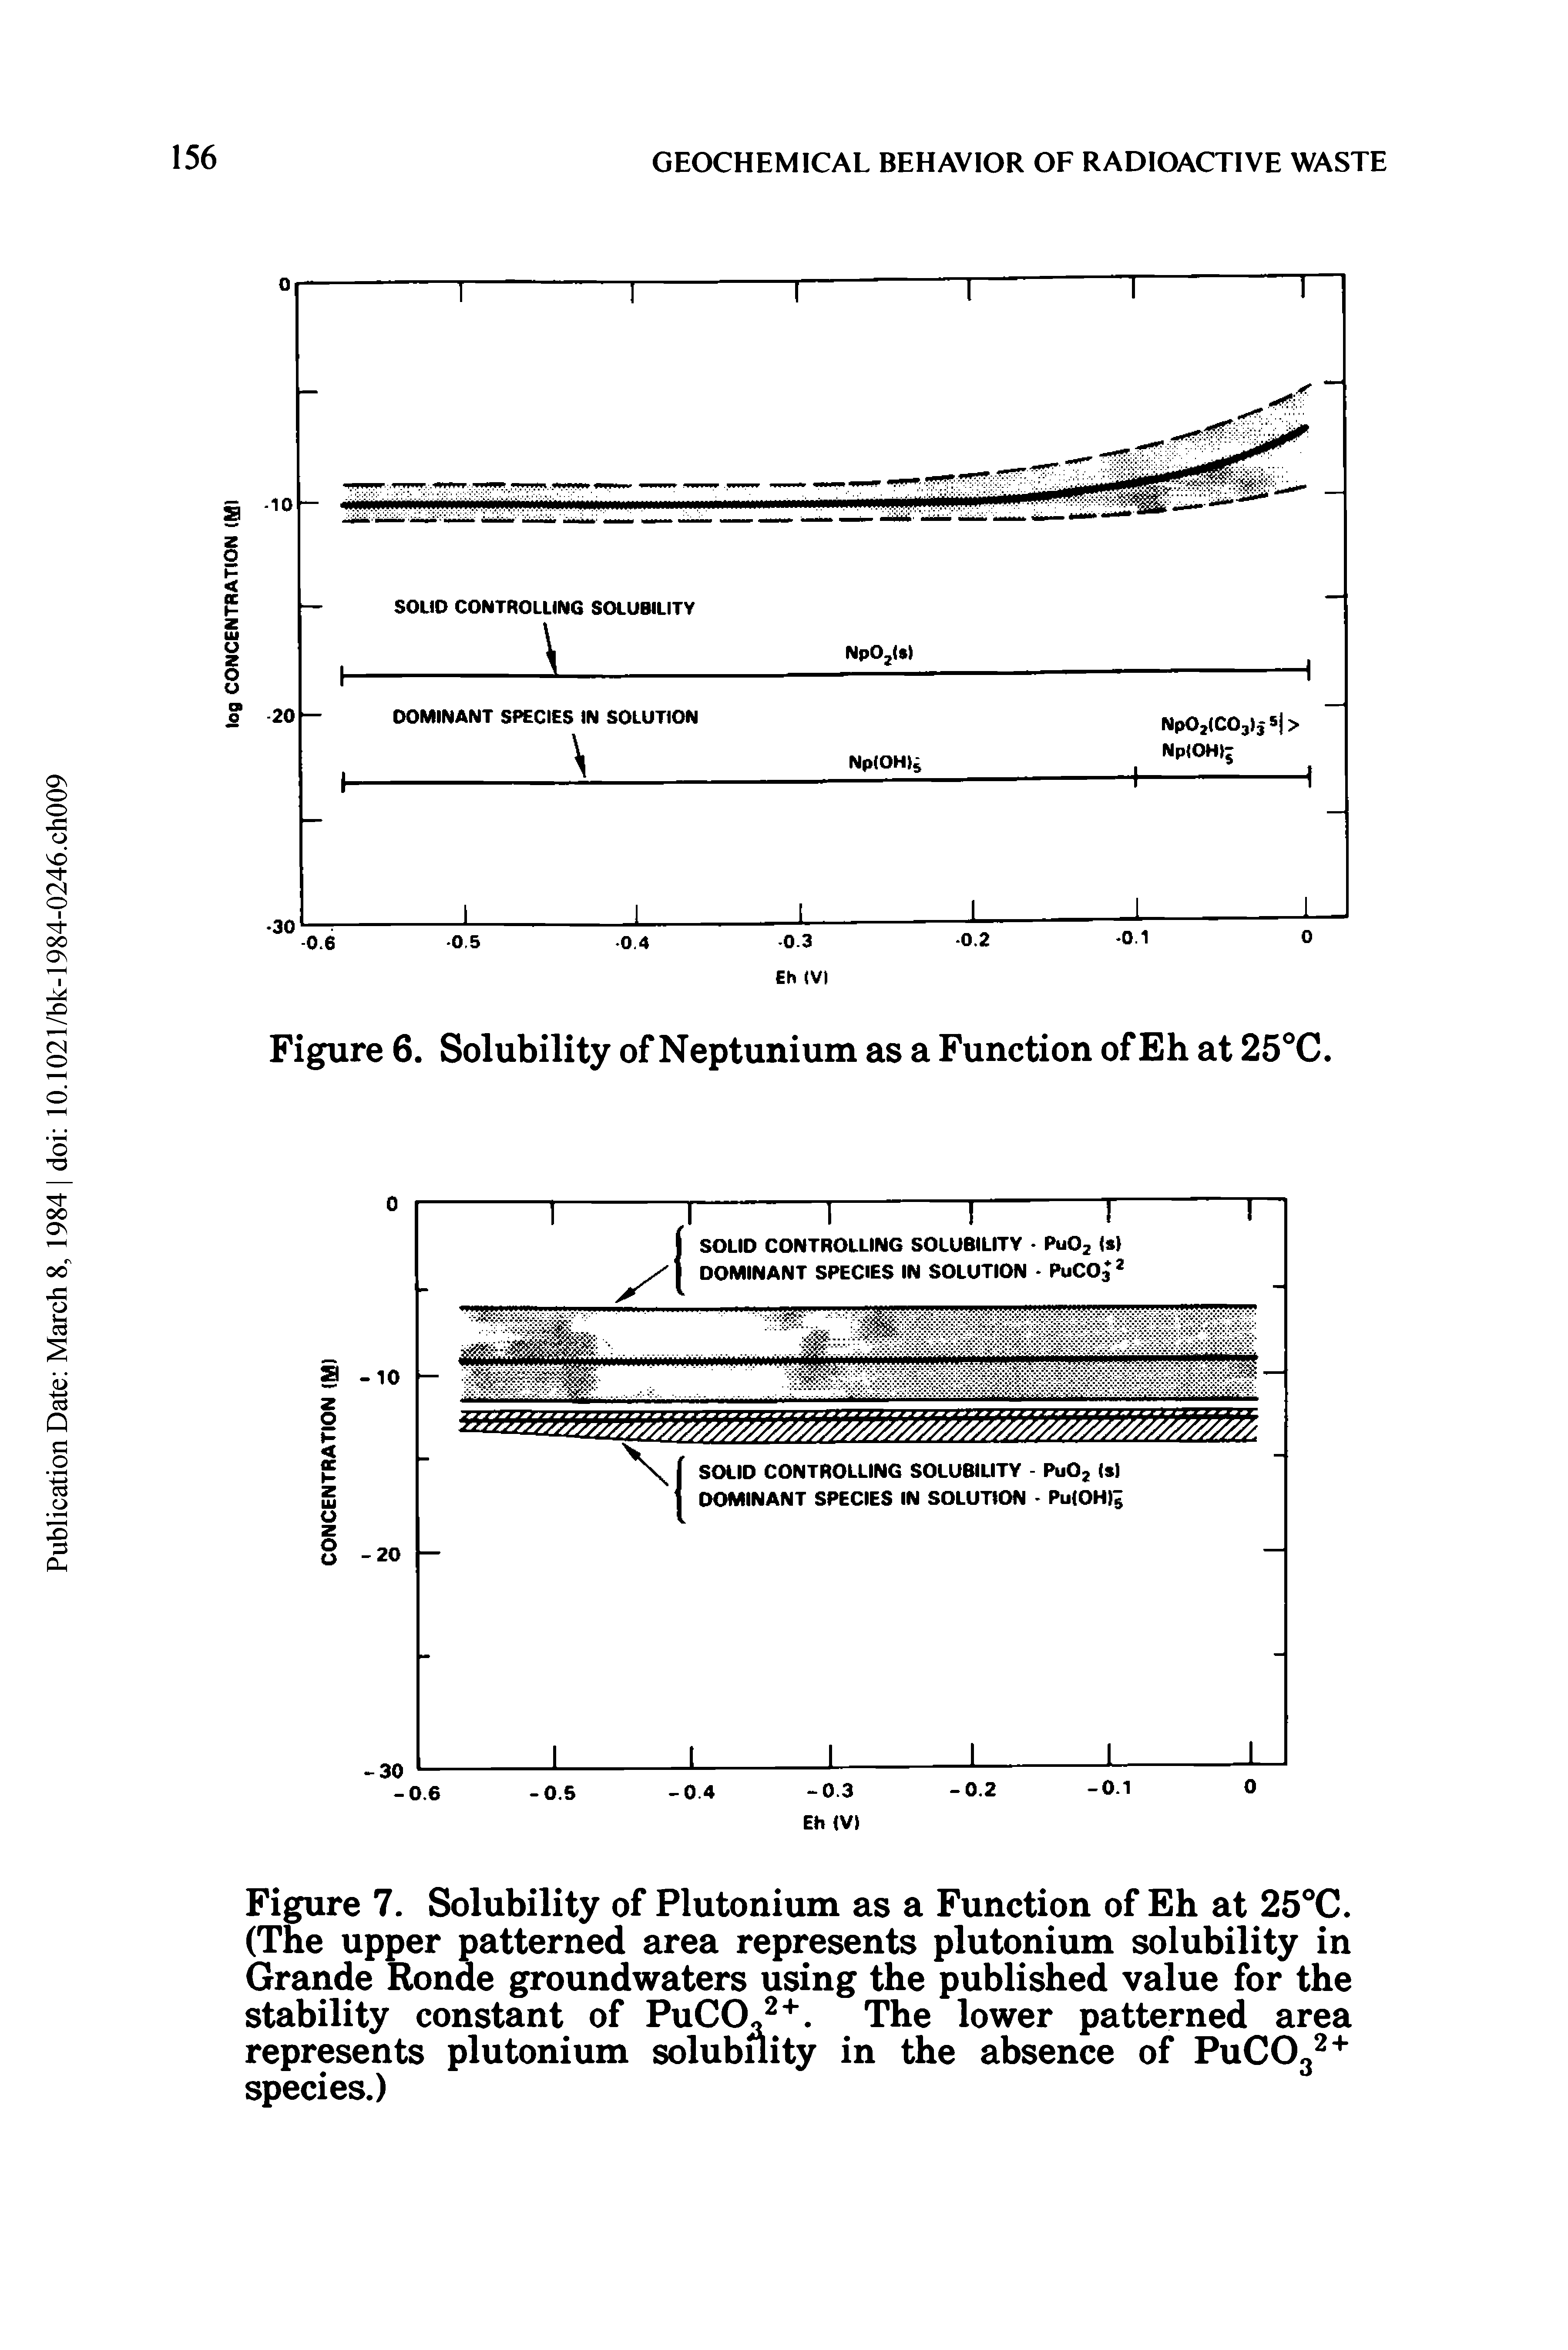 Figure 7. Solubility of Plutonium as a Function of Eh at 25°C. (The upper patterned area represents plutonium solubility in Grande Ronae groundwaters using the published value for the stability constant of PuCO,2+. The lower patterned area represents plutonium solubility in the absence of PuC032+ species.)...